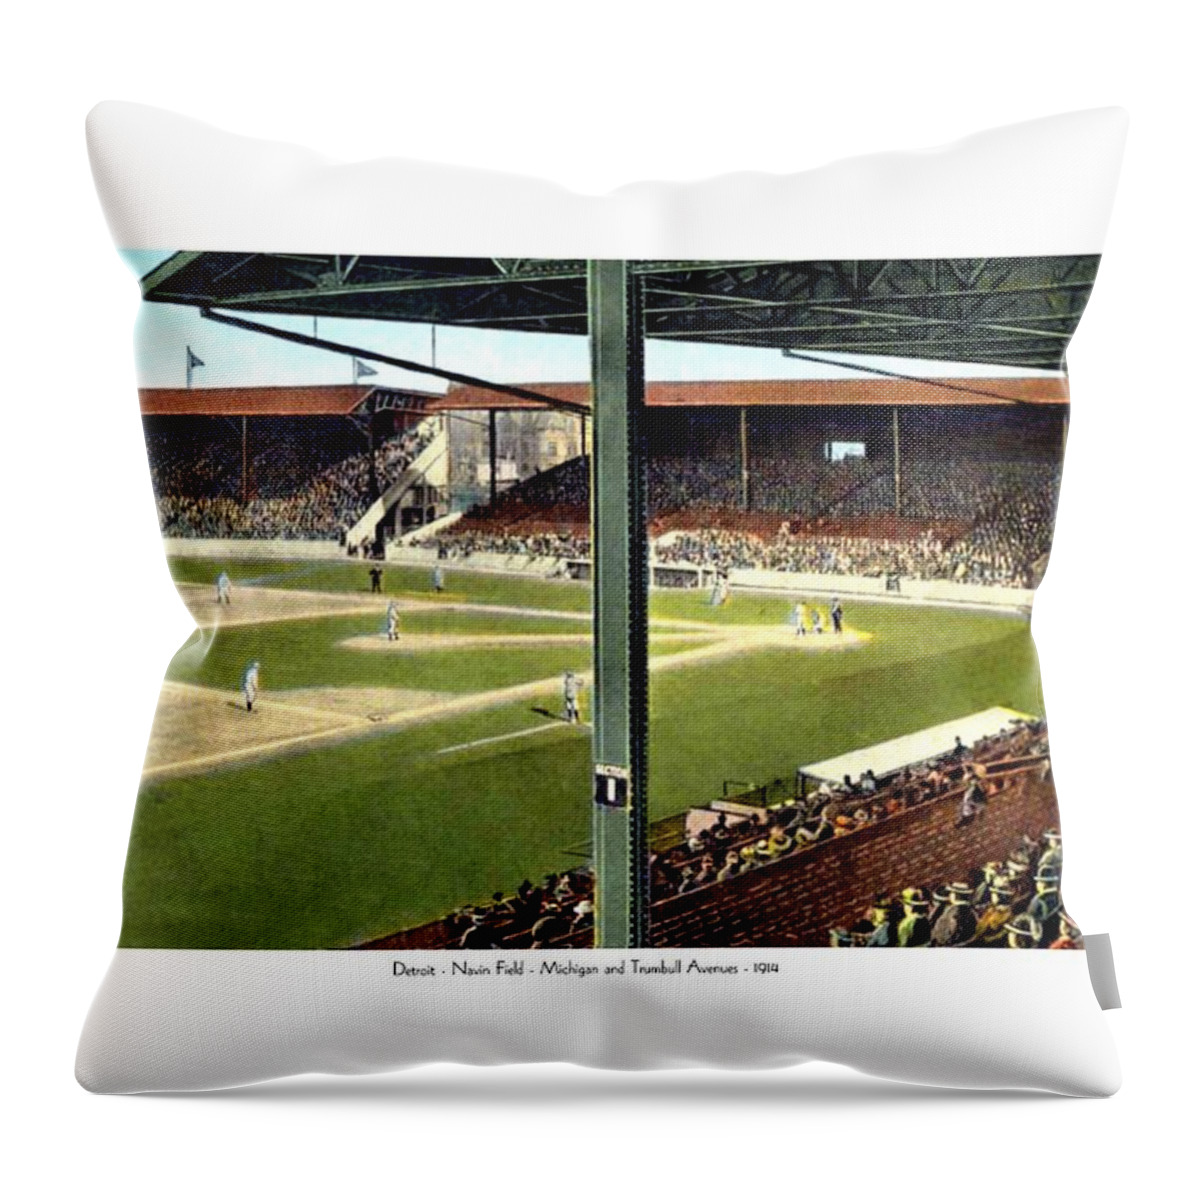 Navin Throw Pillow featuring the digital art Detroit - Navin Field - Detroit Tigers - Michigan and Trumbull Avenues - 1914 by John Madison